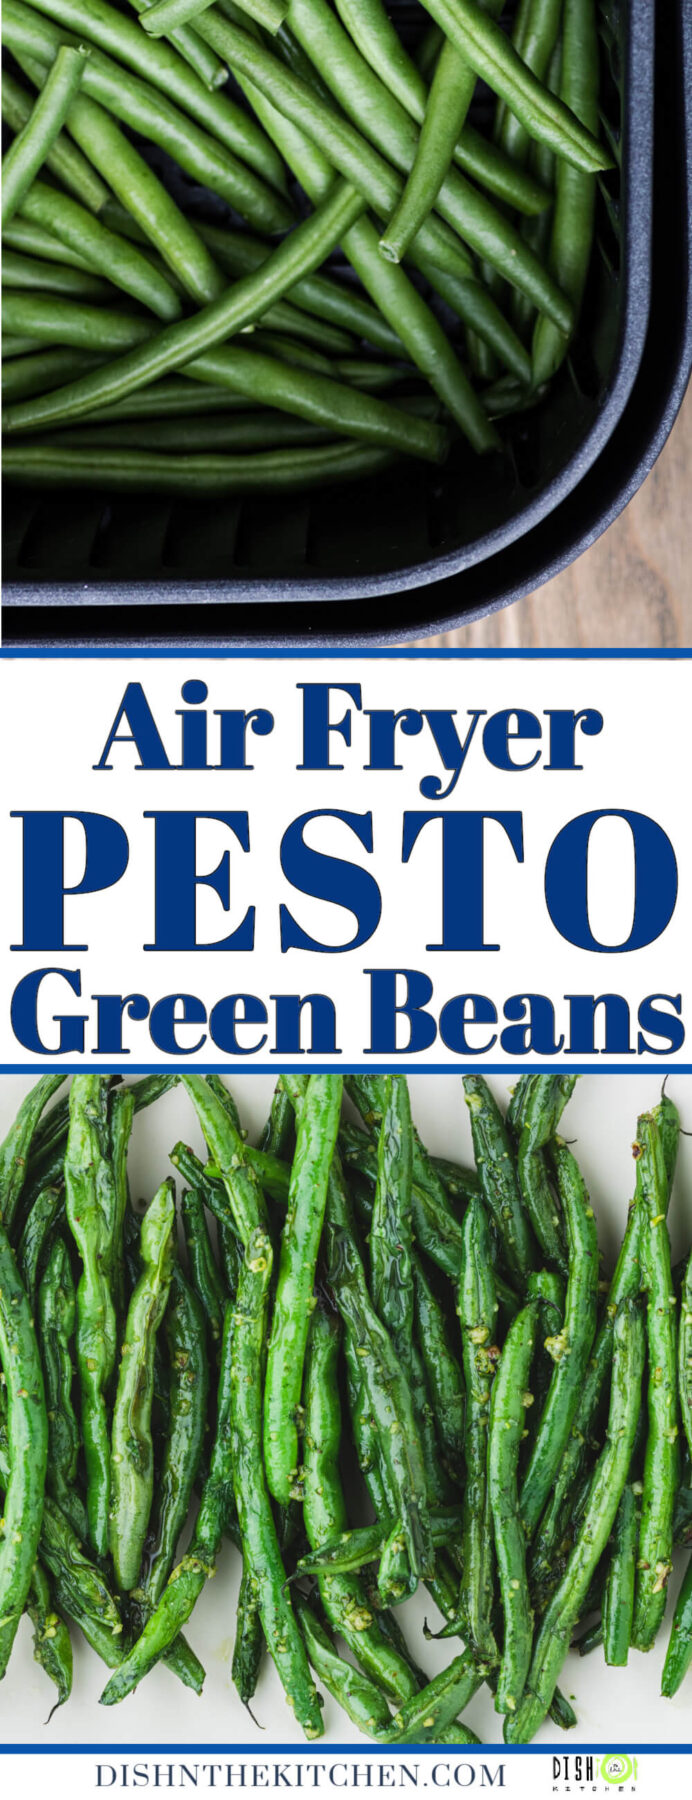 Pinterest image of raw green beans in an air fryer and Pesto Green Beans on a white platter.